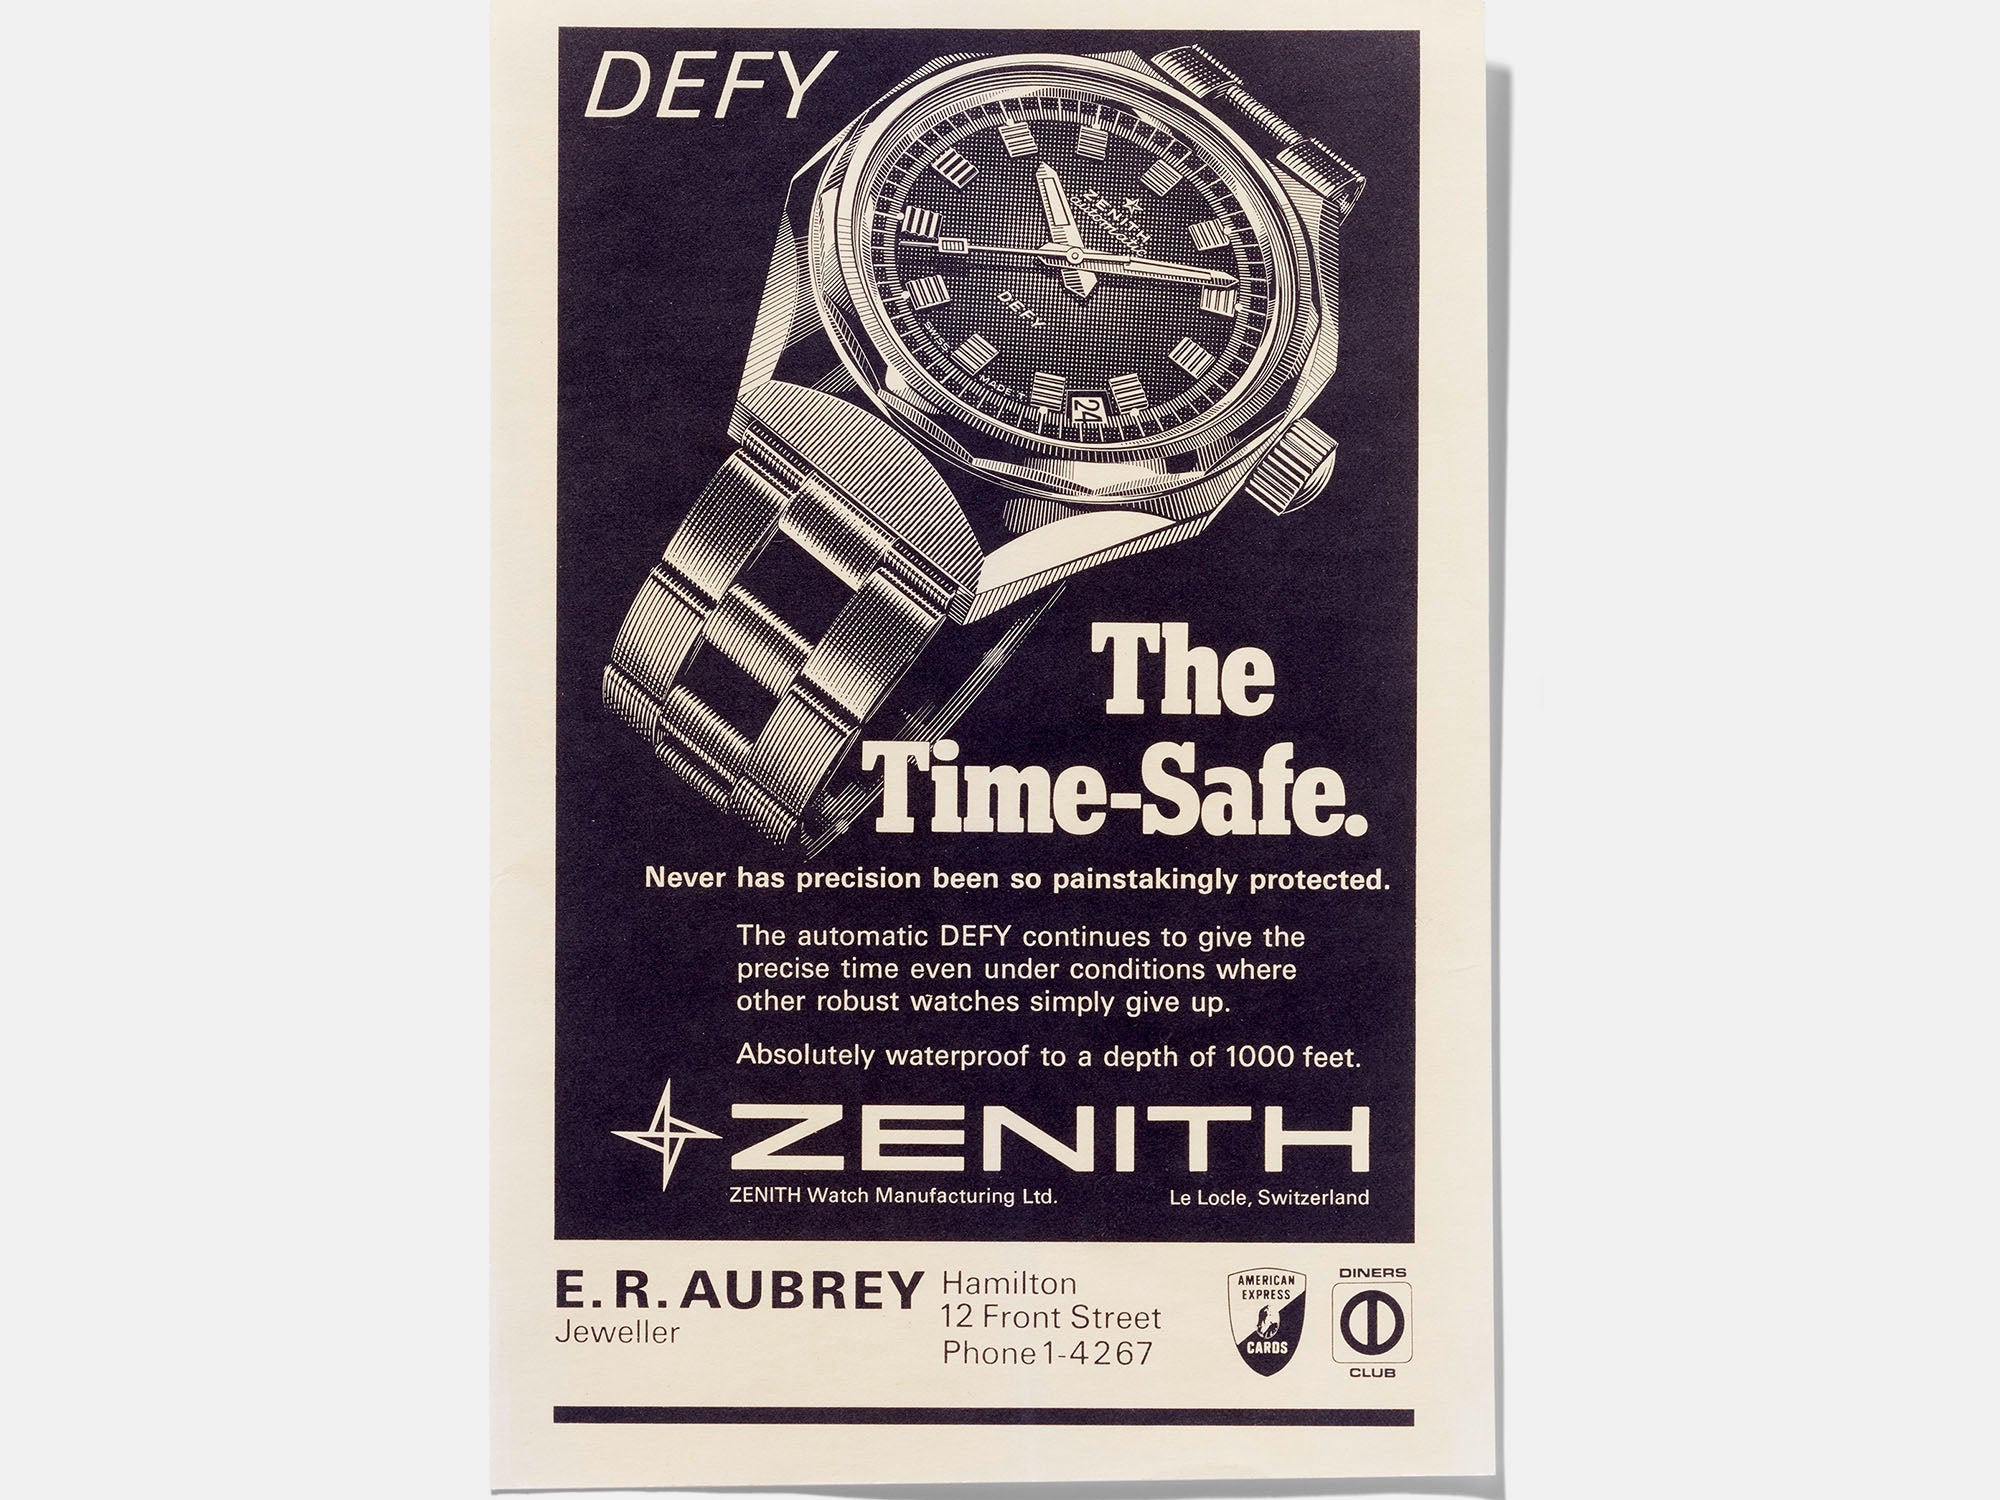 Zenith Adds a Smaller 36mm Defy Skyline to the Collection in a